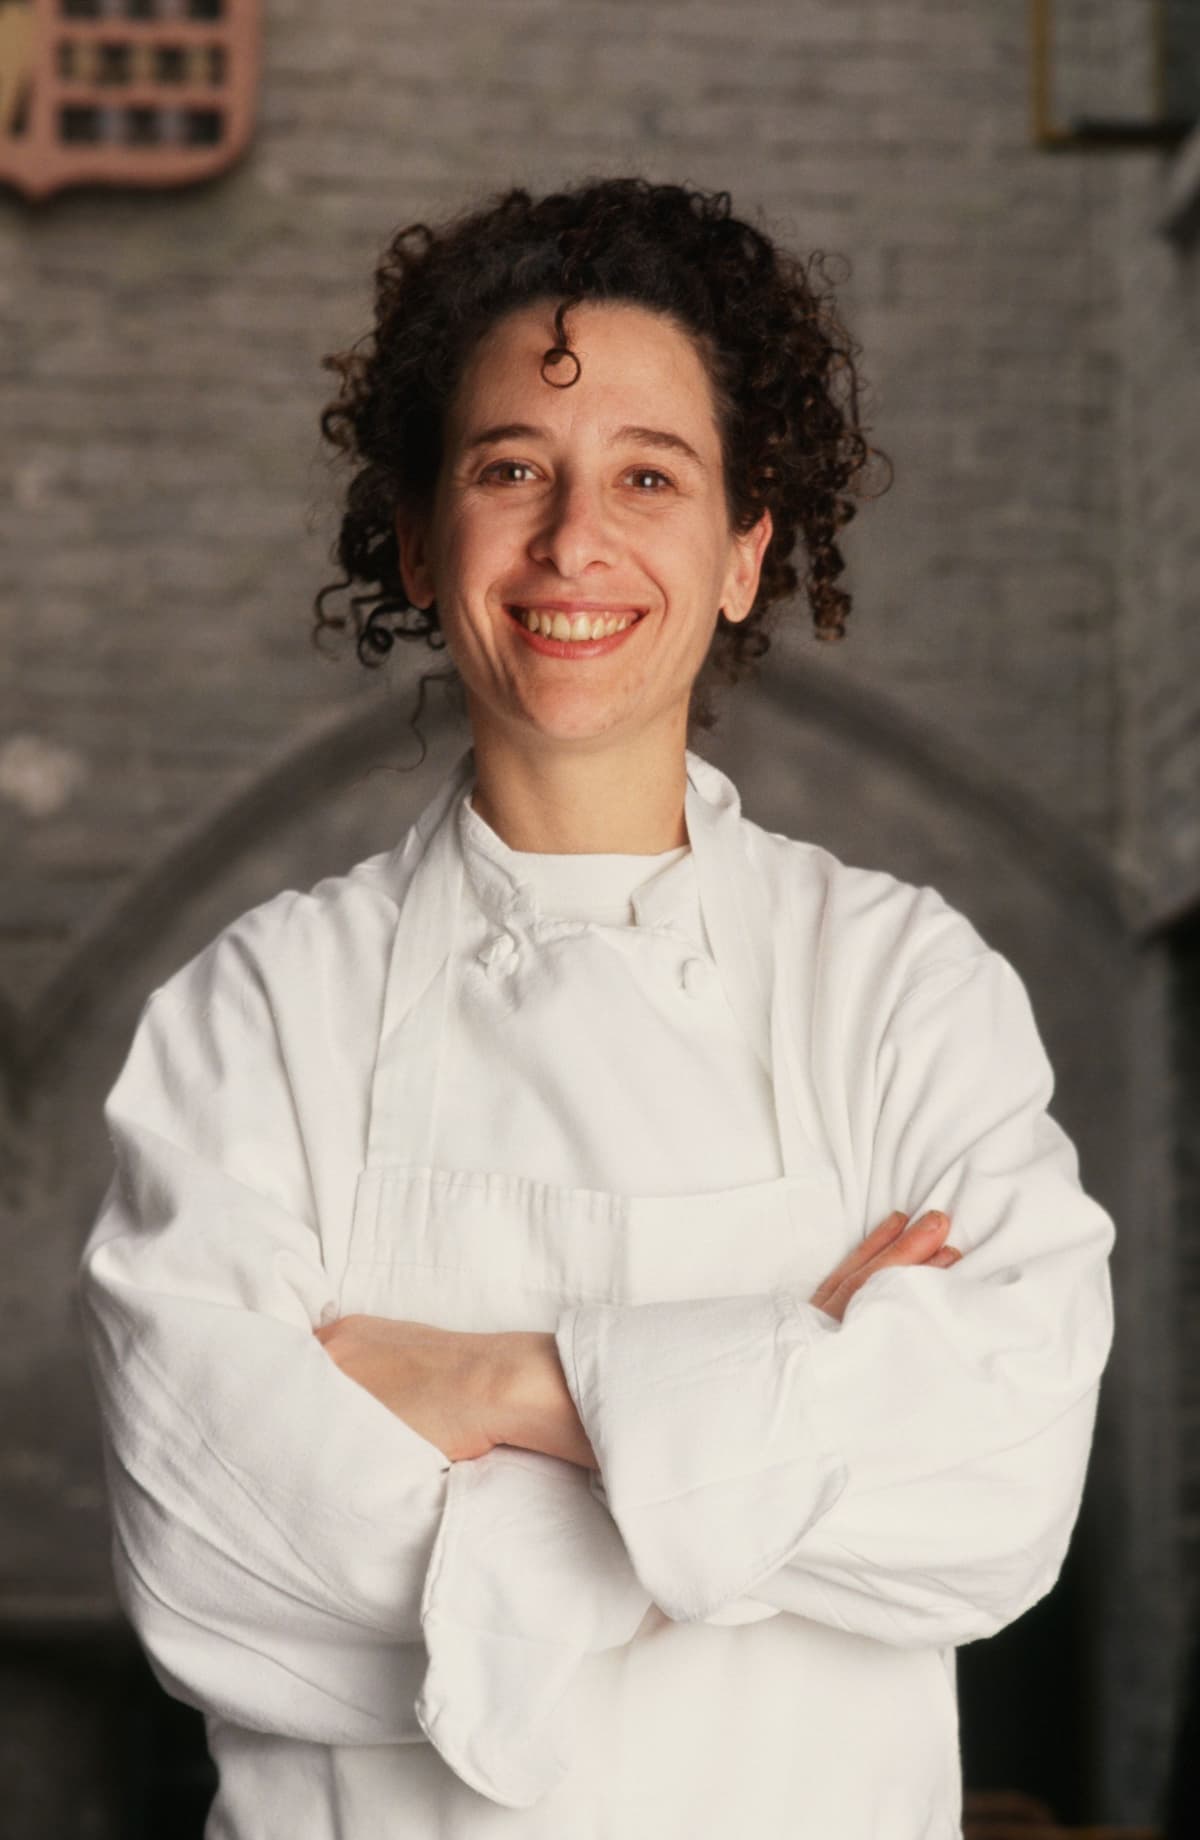 Chef Nancy Silverton posing with a smile on her face